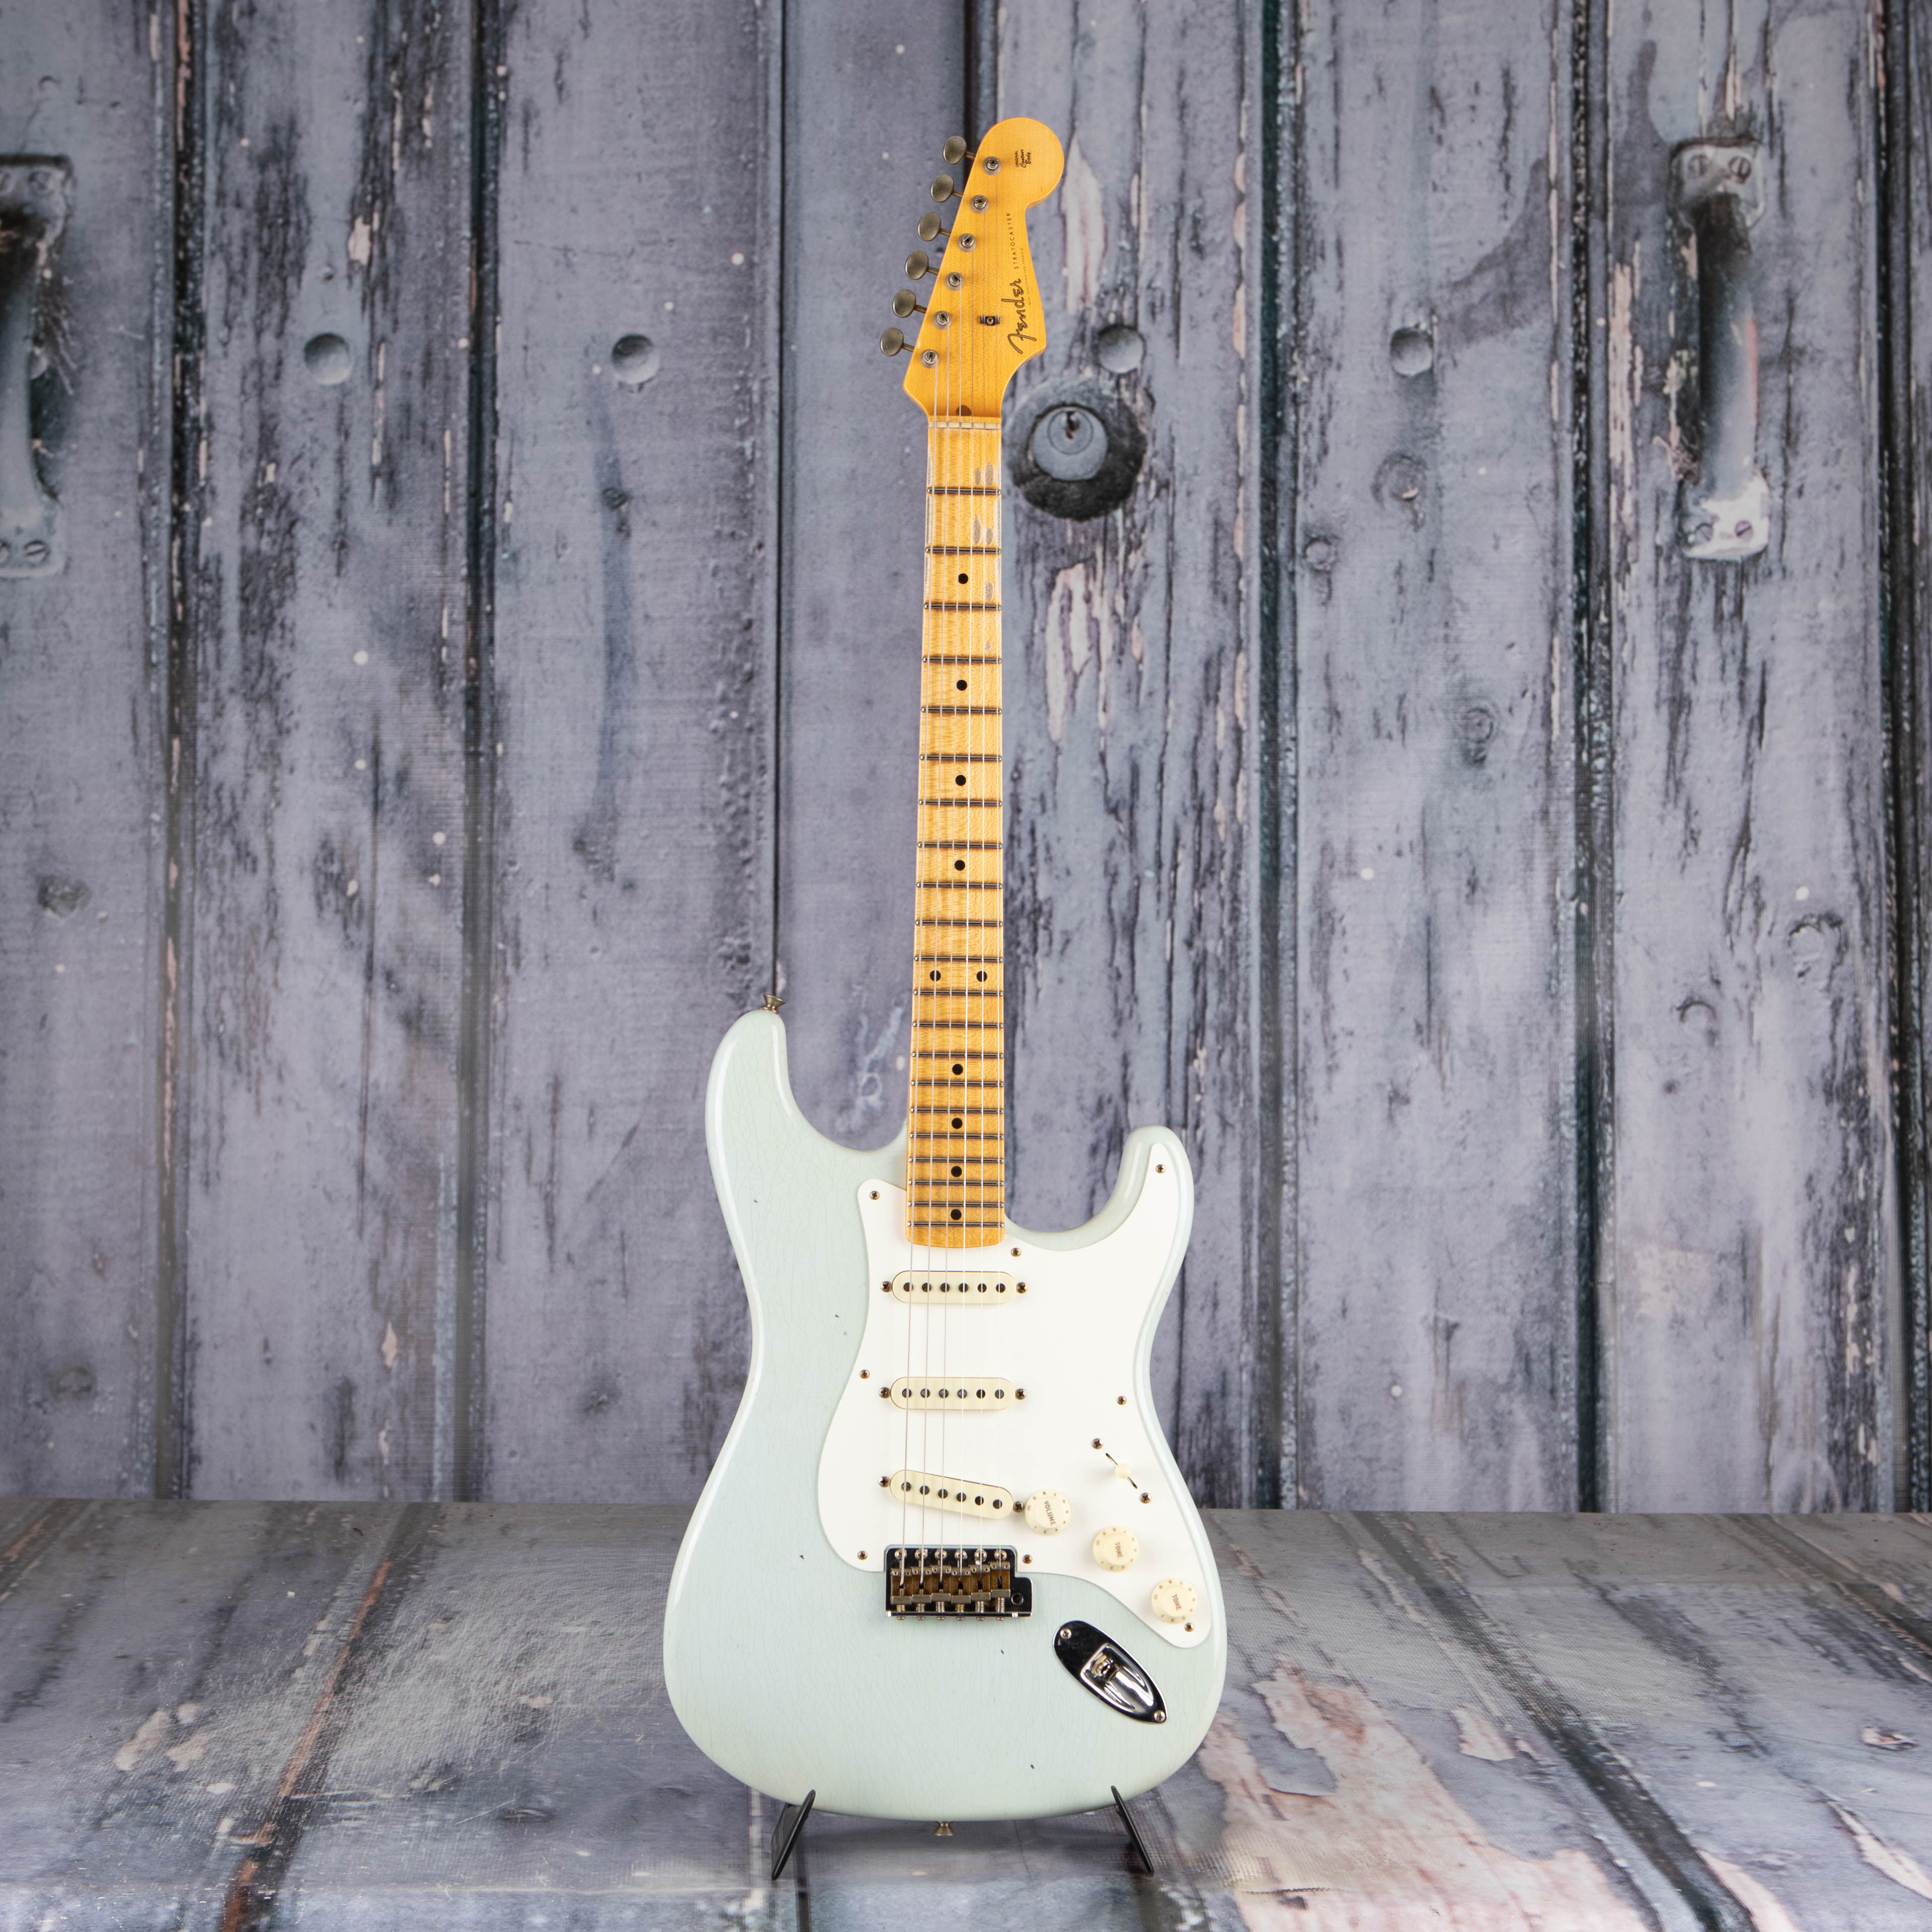 Fender Custom Shop Limited Edition '57 Stratocaster Journeyman Relic Electric Guitar, Aged Sonic Blue, front